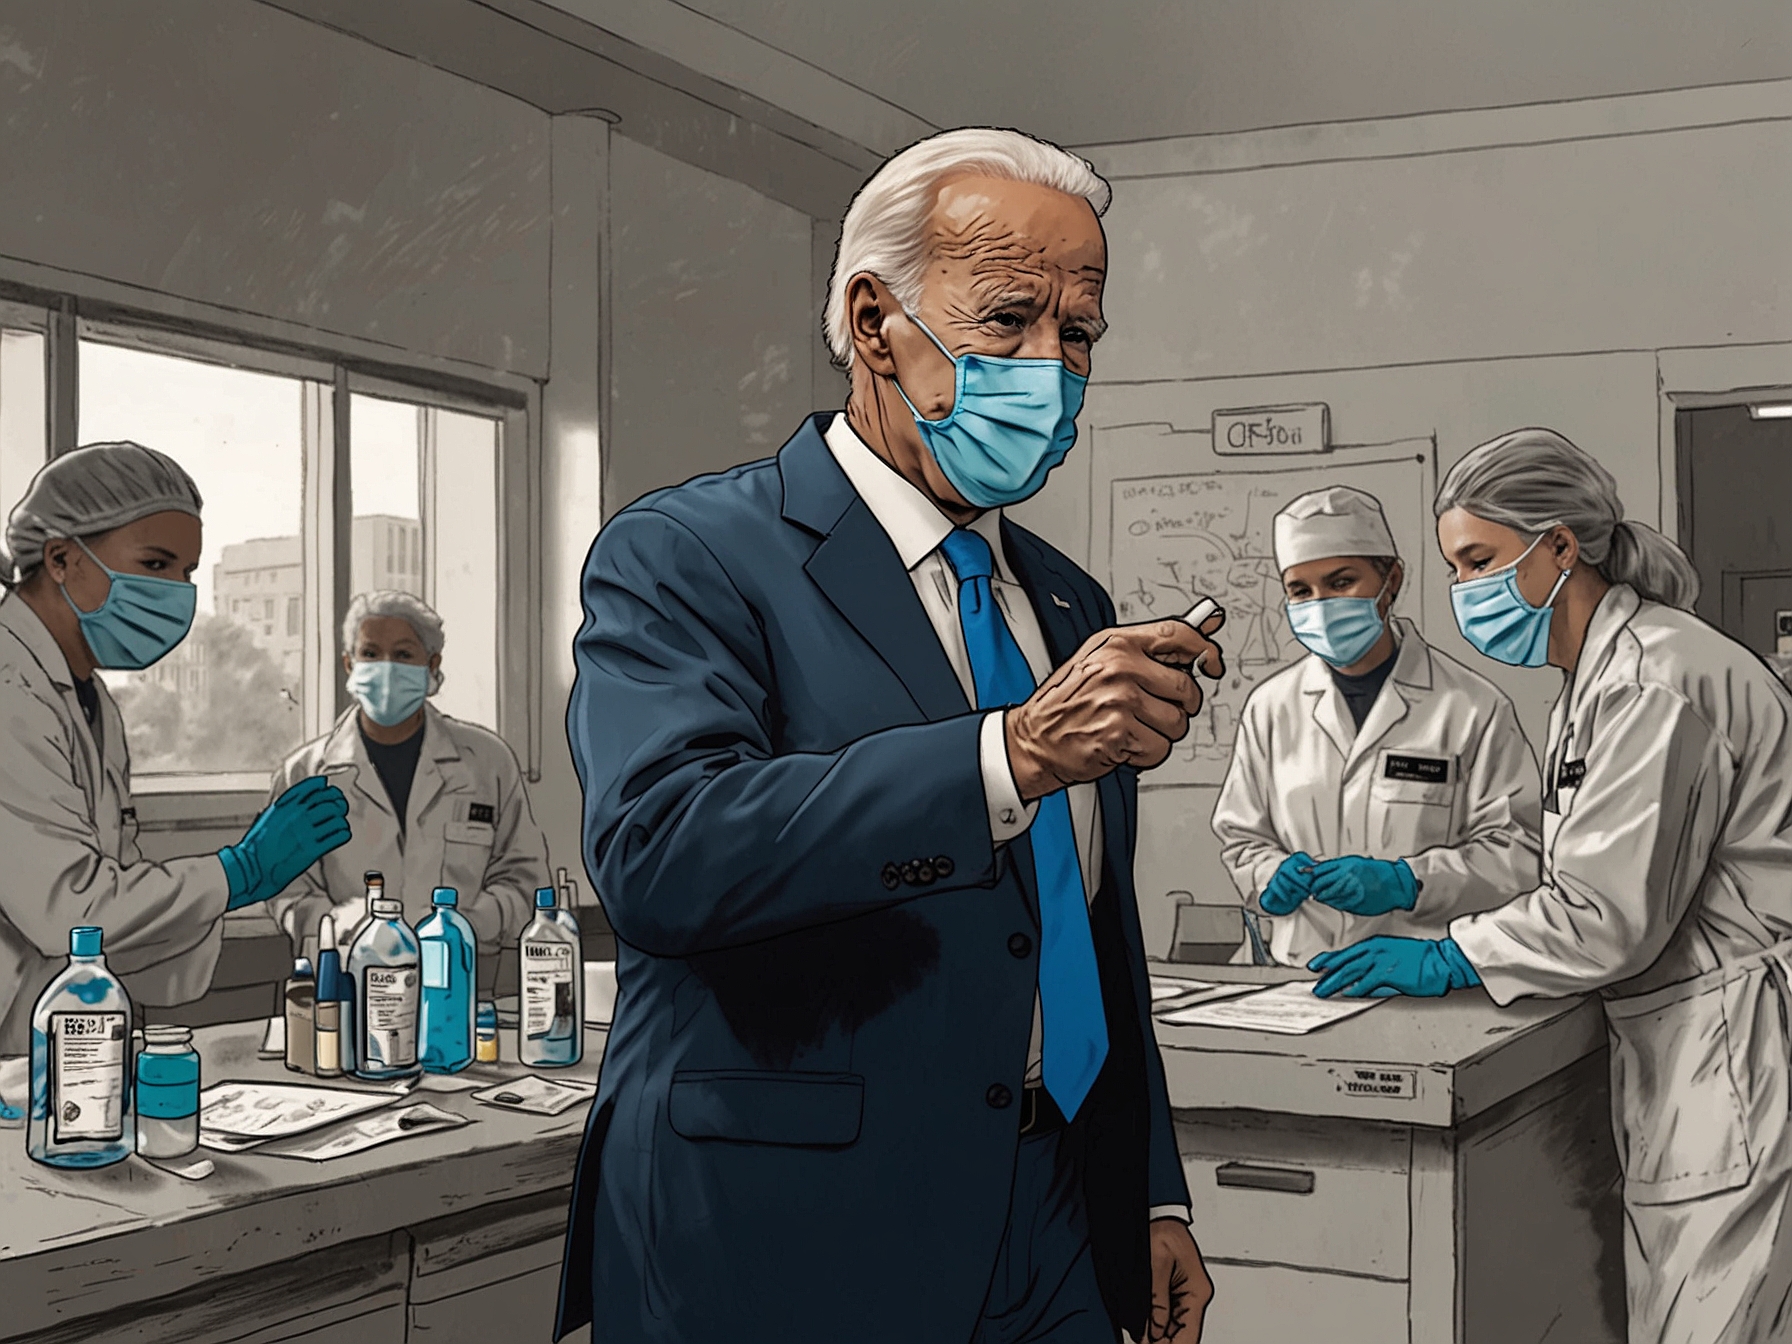 A graphic depicting Biden's efforts in handling the COVID-19 pandemic, featuring visuals of vaccine distribution, healthcare workers, and scientific research to highlight his crisis management skills.